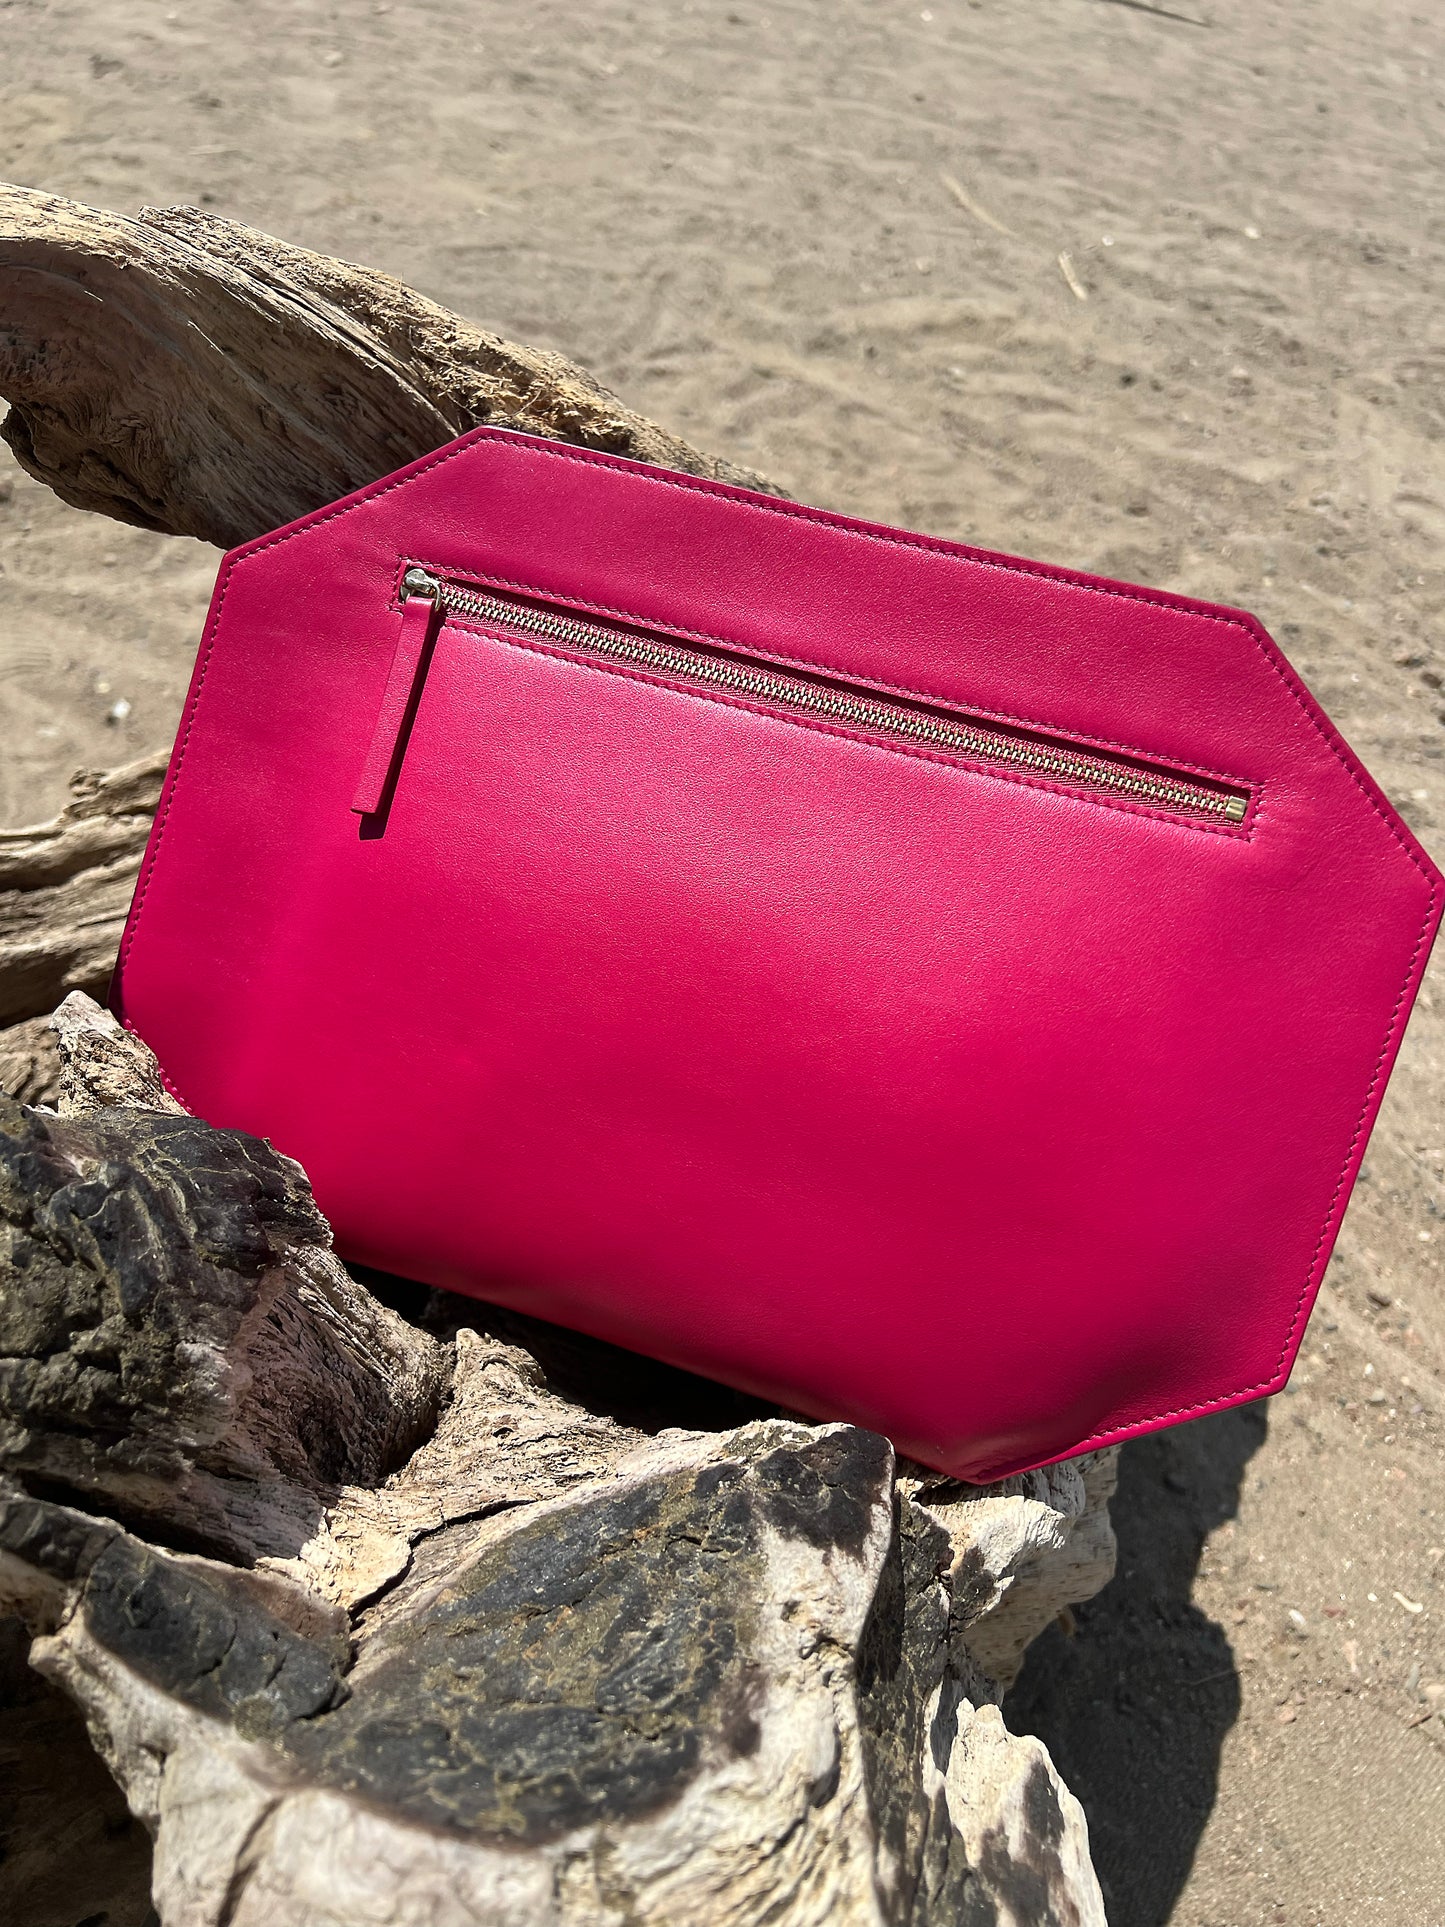 sitting on driftwood at the beach. Pink smooth matte leather, Large zipper clutch in bright pink by Chandra Keyser